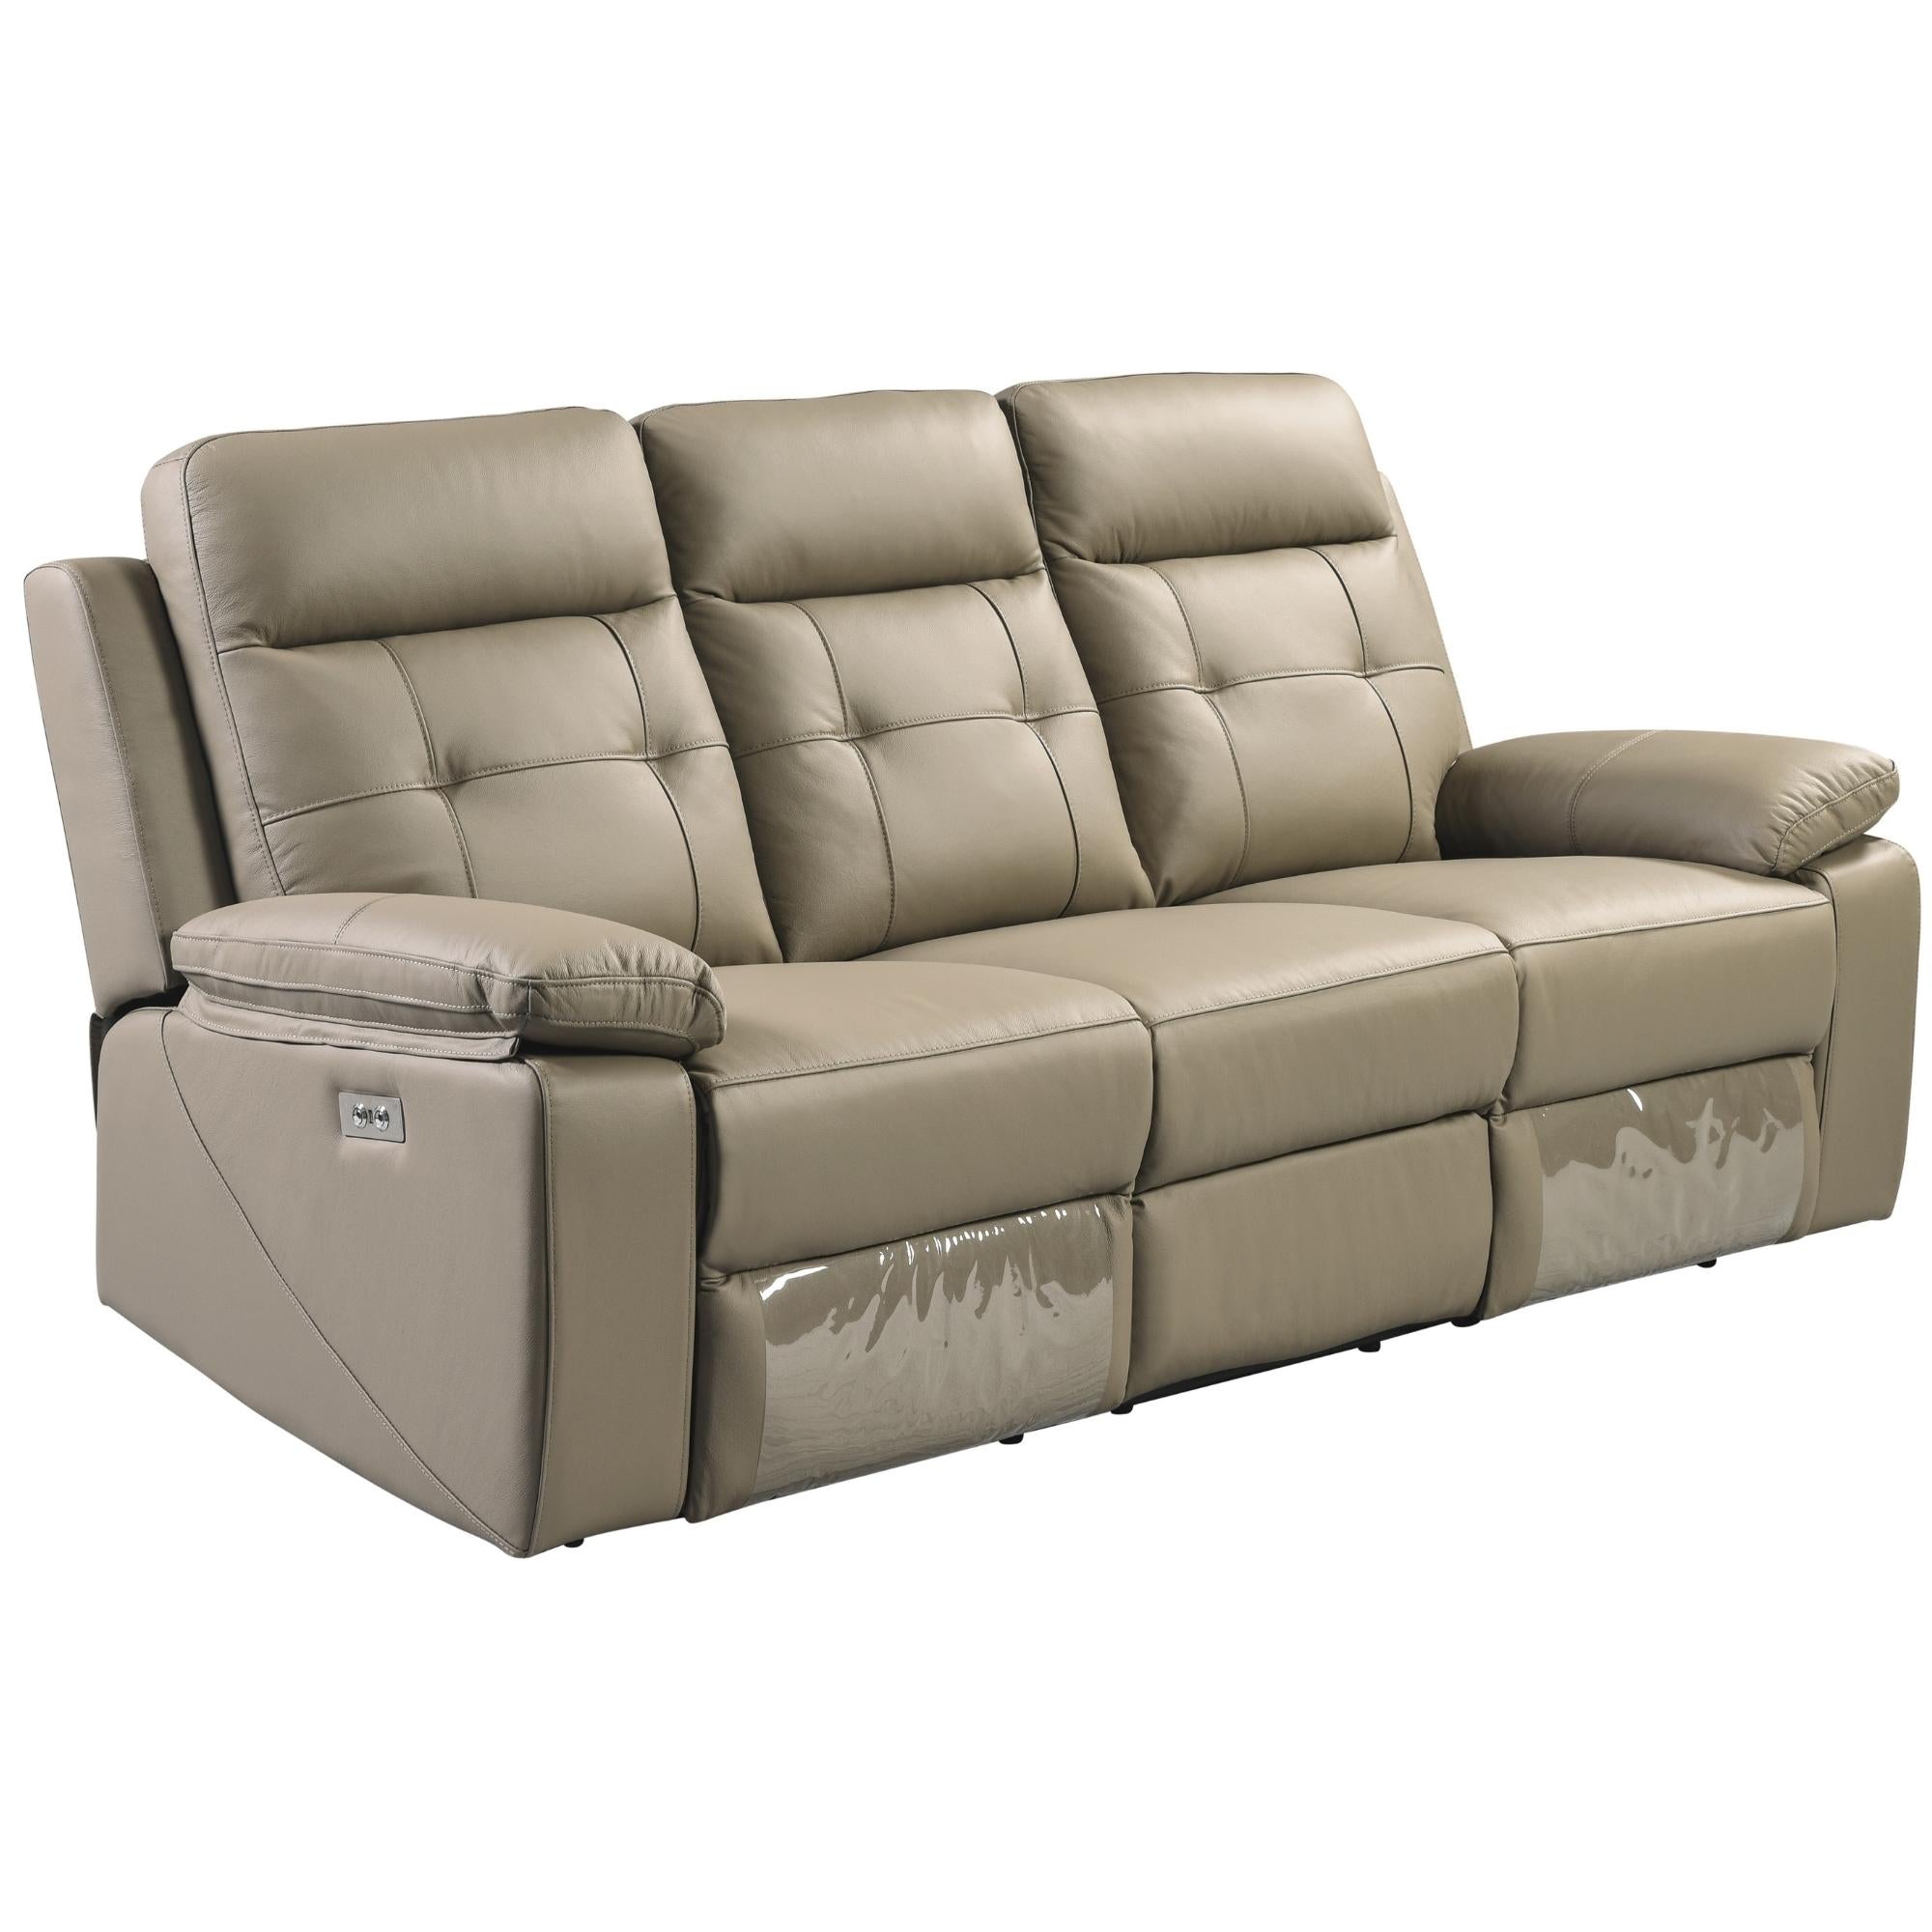 3 + 2 Seater Electric Recliner Sofa Genuine Leather Home Theater Lounge